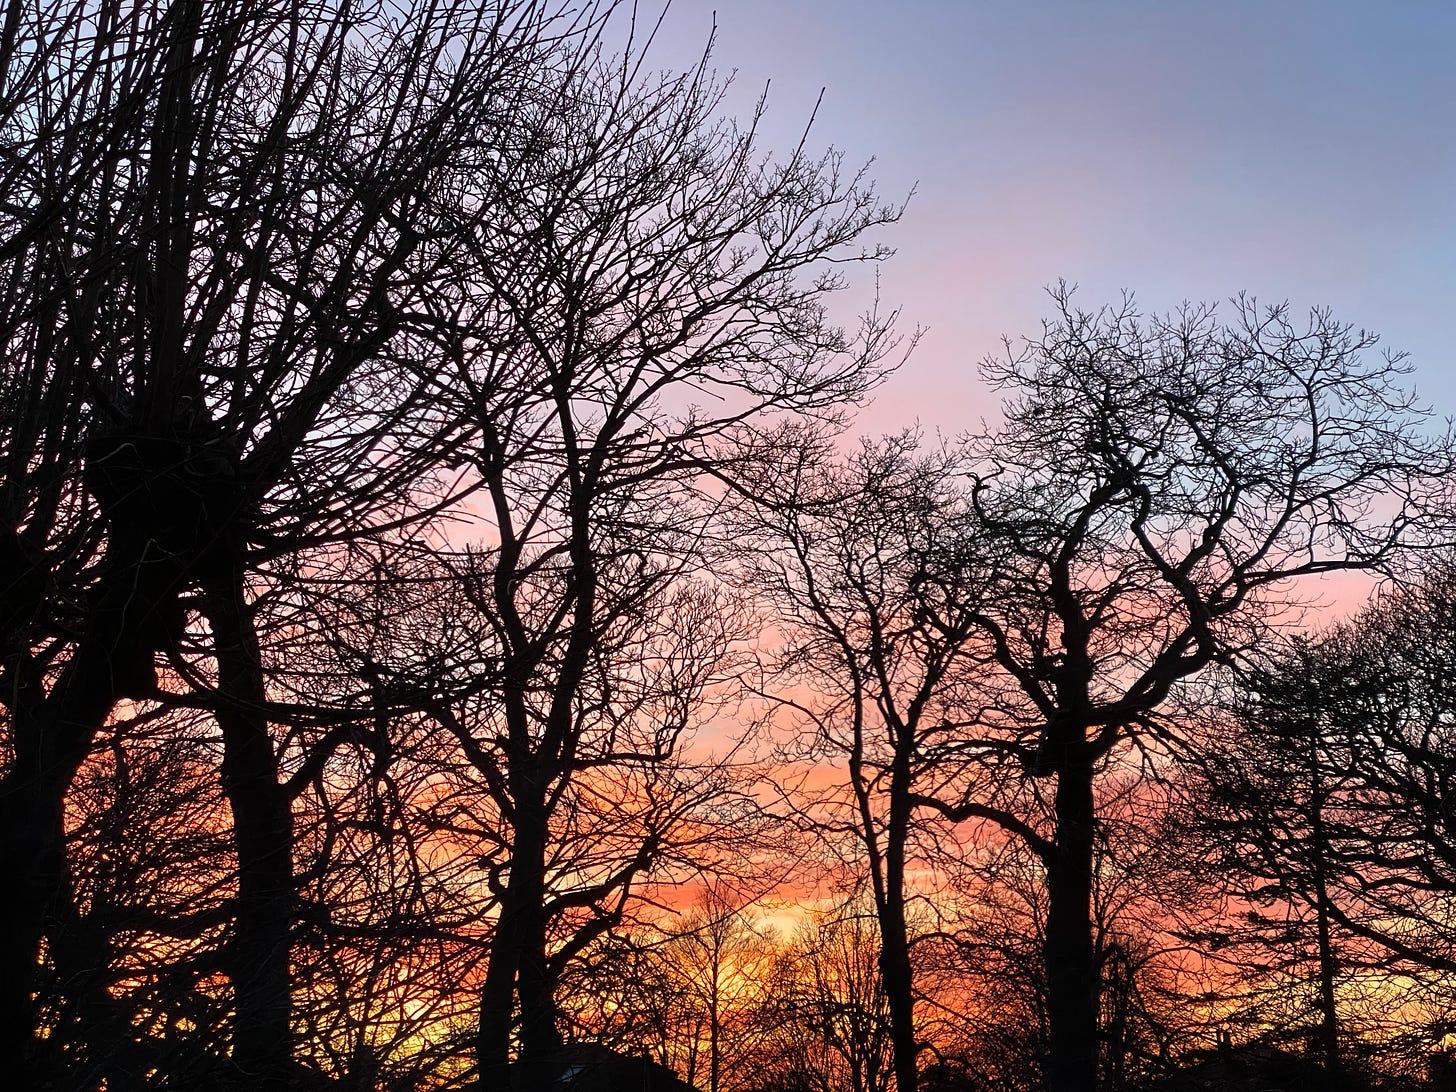 view of sunset looking west through winter trees